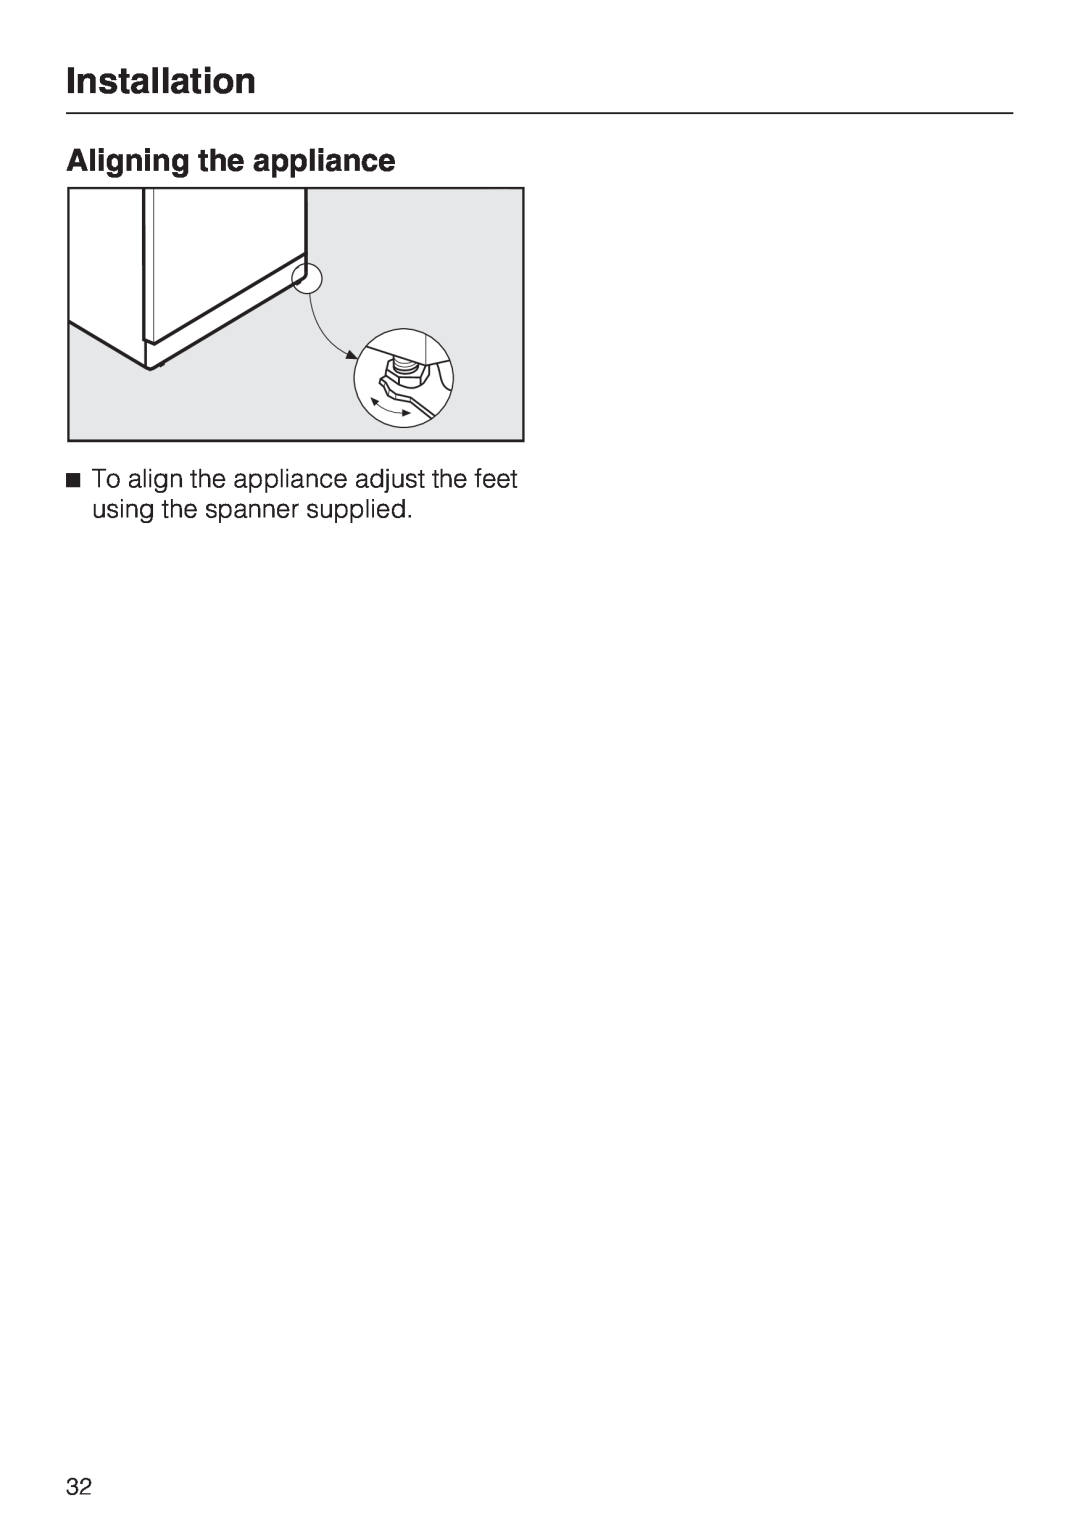 Miele FN 12220 S, FN 12420 S, FN 12620 S installation instructions Aligning the appliance, Installation 